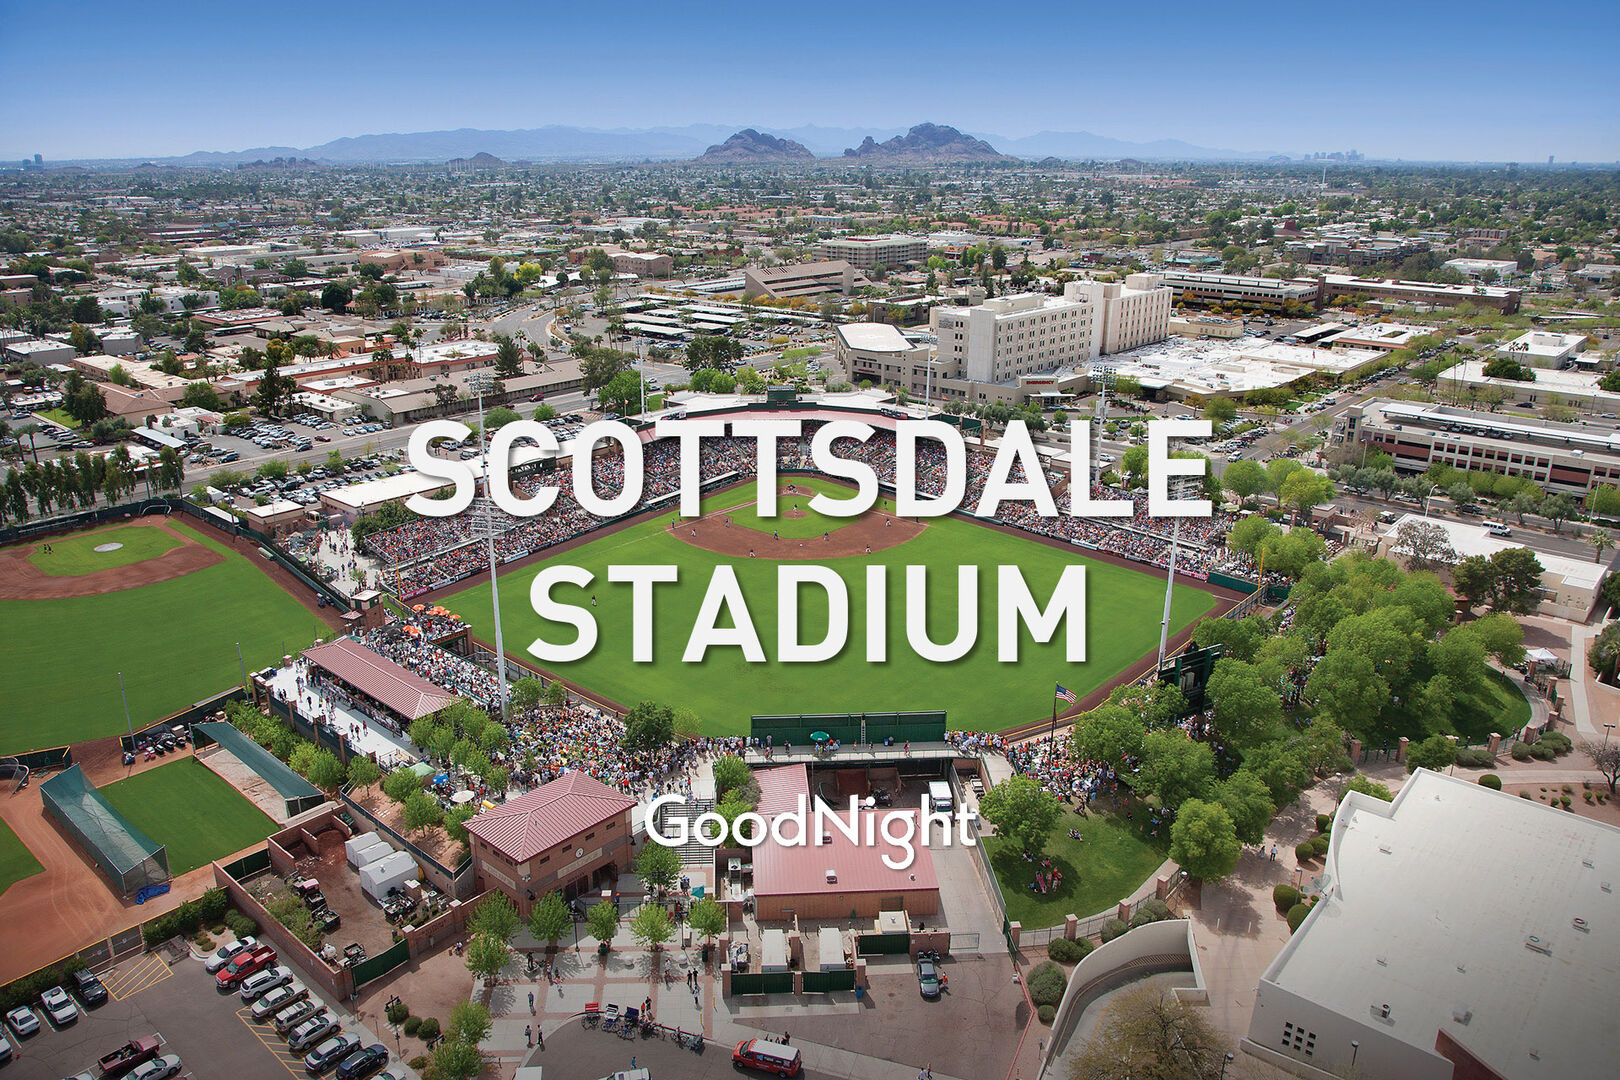 5 mins: Scottsdale Stadium - Home of SF Giants during Spring Training